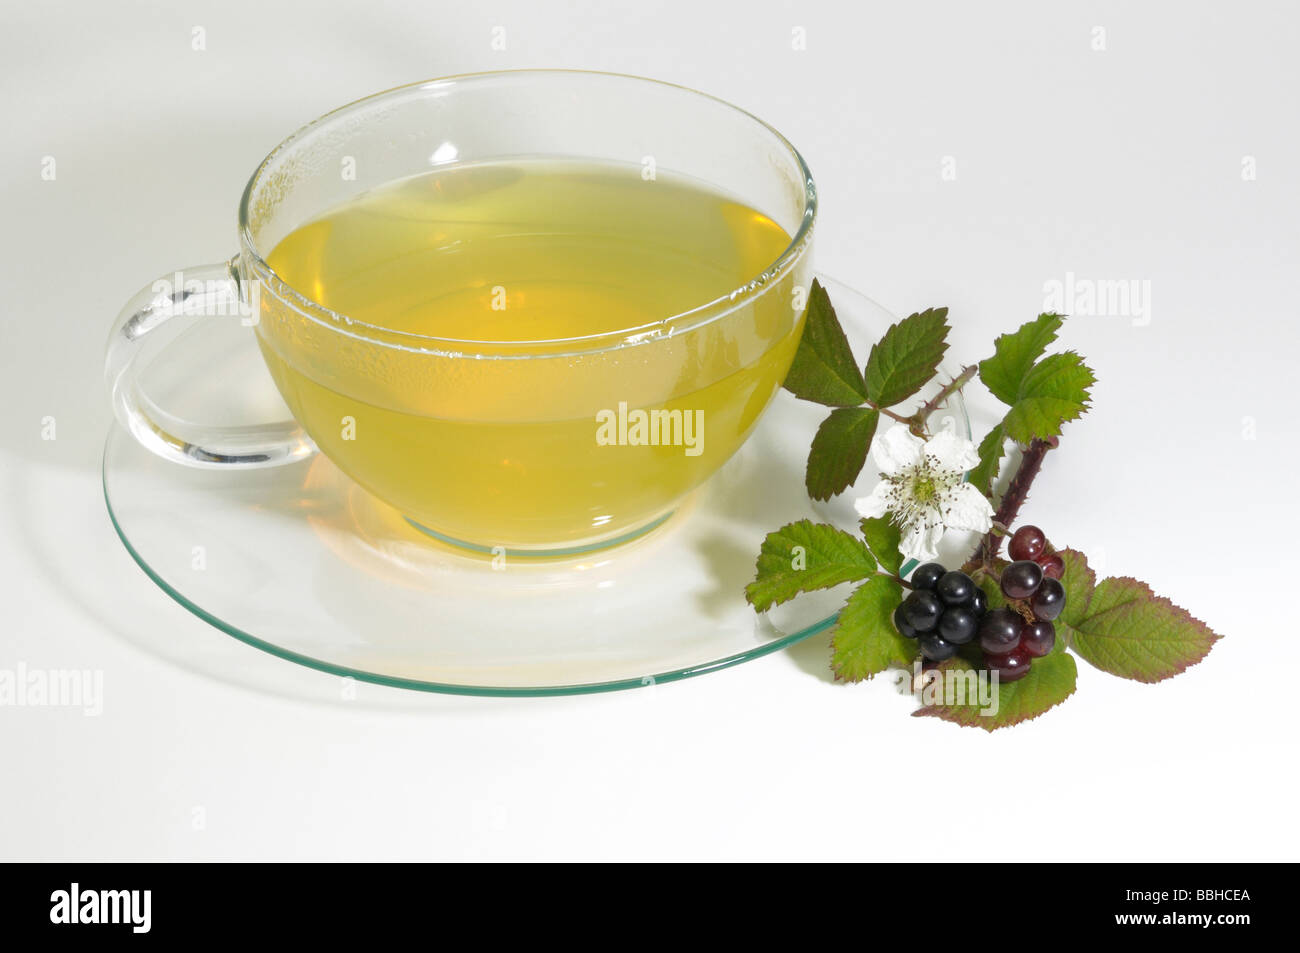 Bramble (Rubus fruticosus). A cup of tea with flower leaf and bramble, studio picture Stock Photo